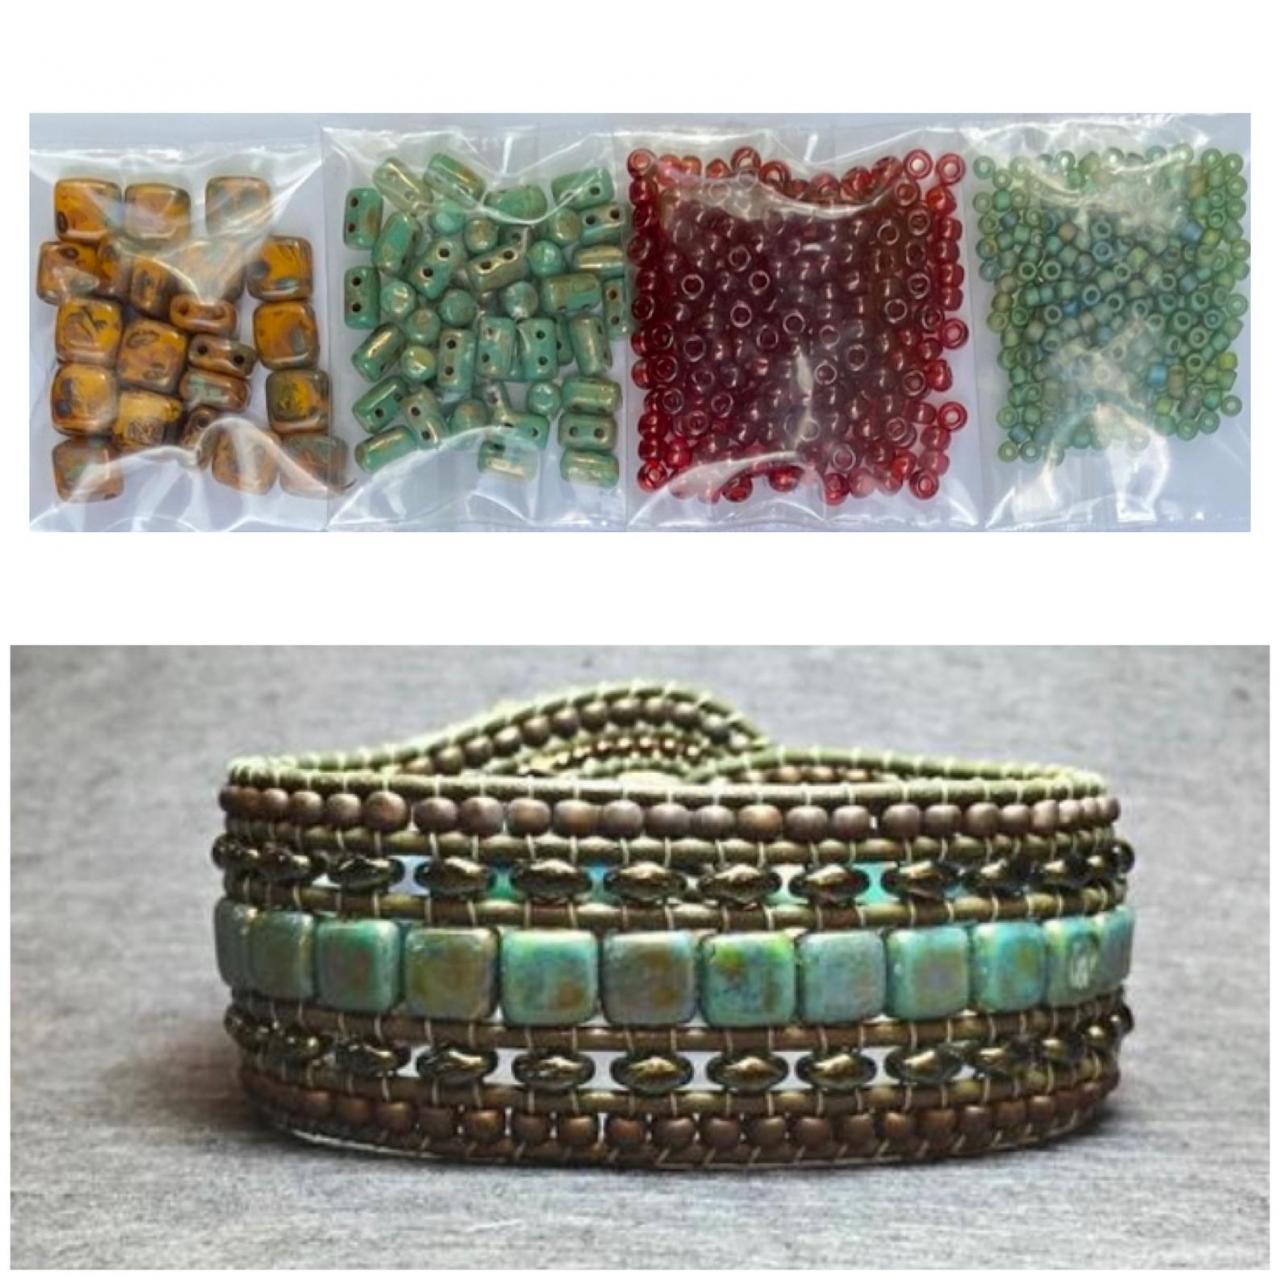 KIT Wide Leather Beaded Cuff Bonny Mustard Garnet Turquoise Picasso DIY Intermediate Instructions Complete NO Tools #15